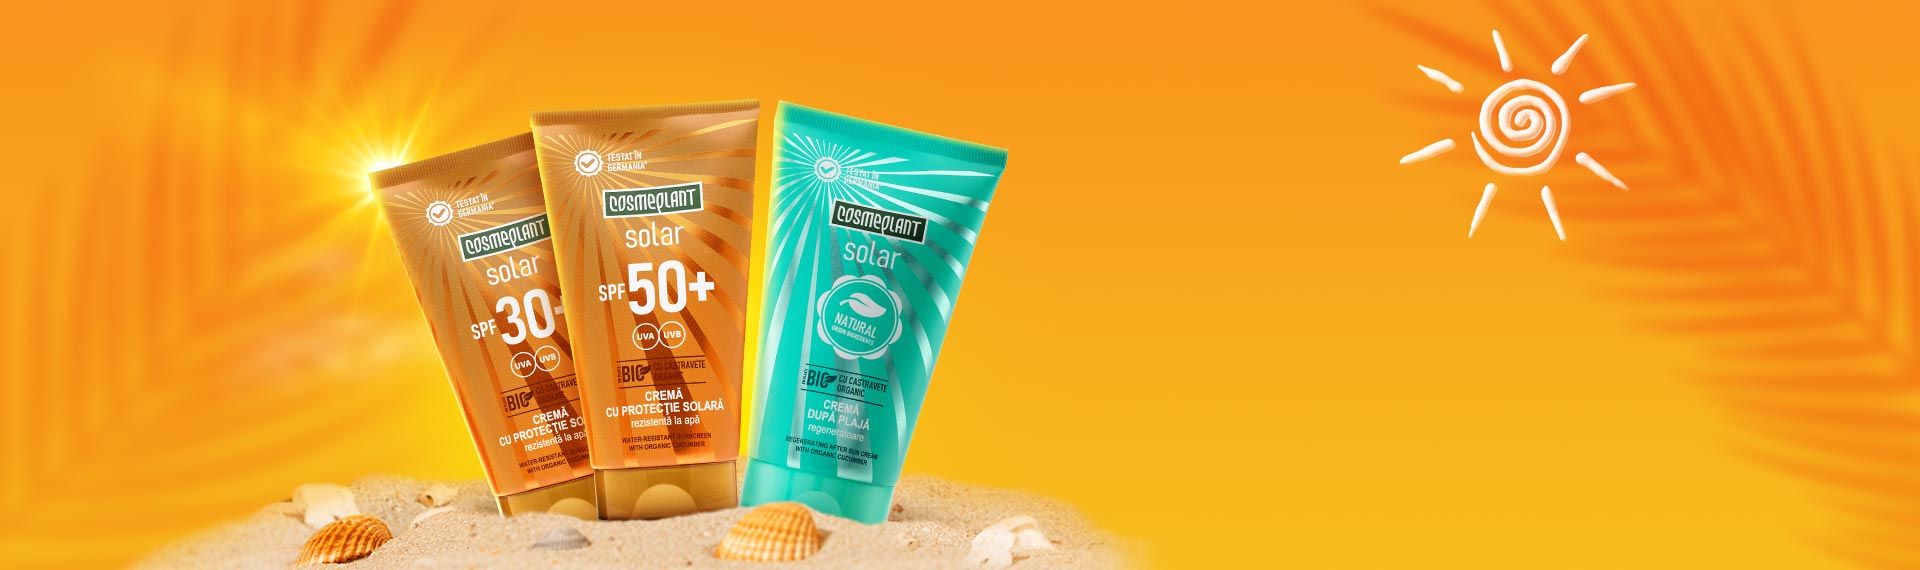 THIS SUMMER'S TREND IS . . . SPF